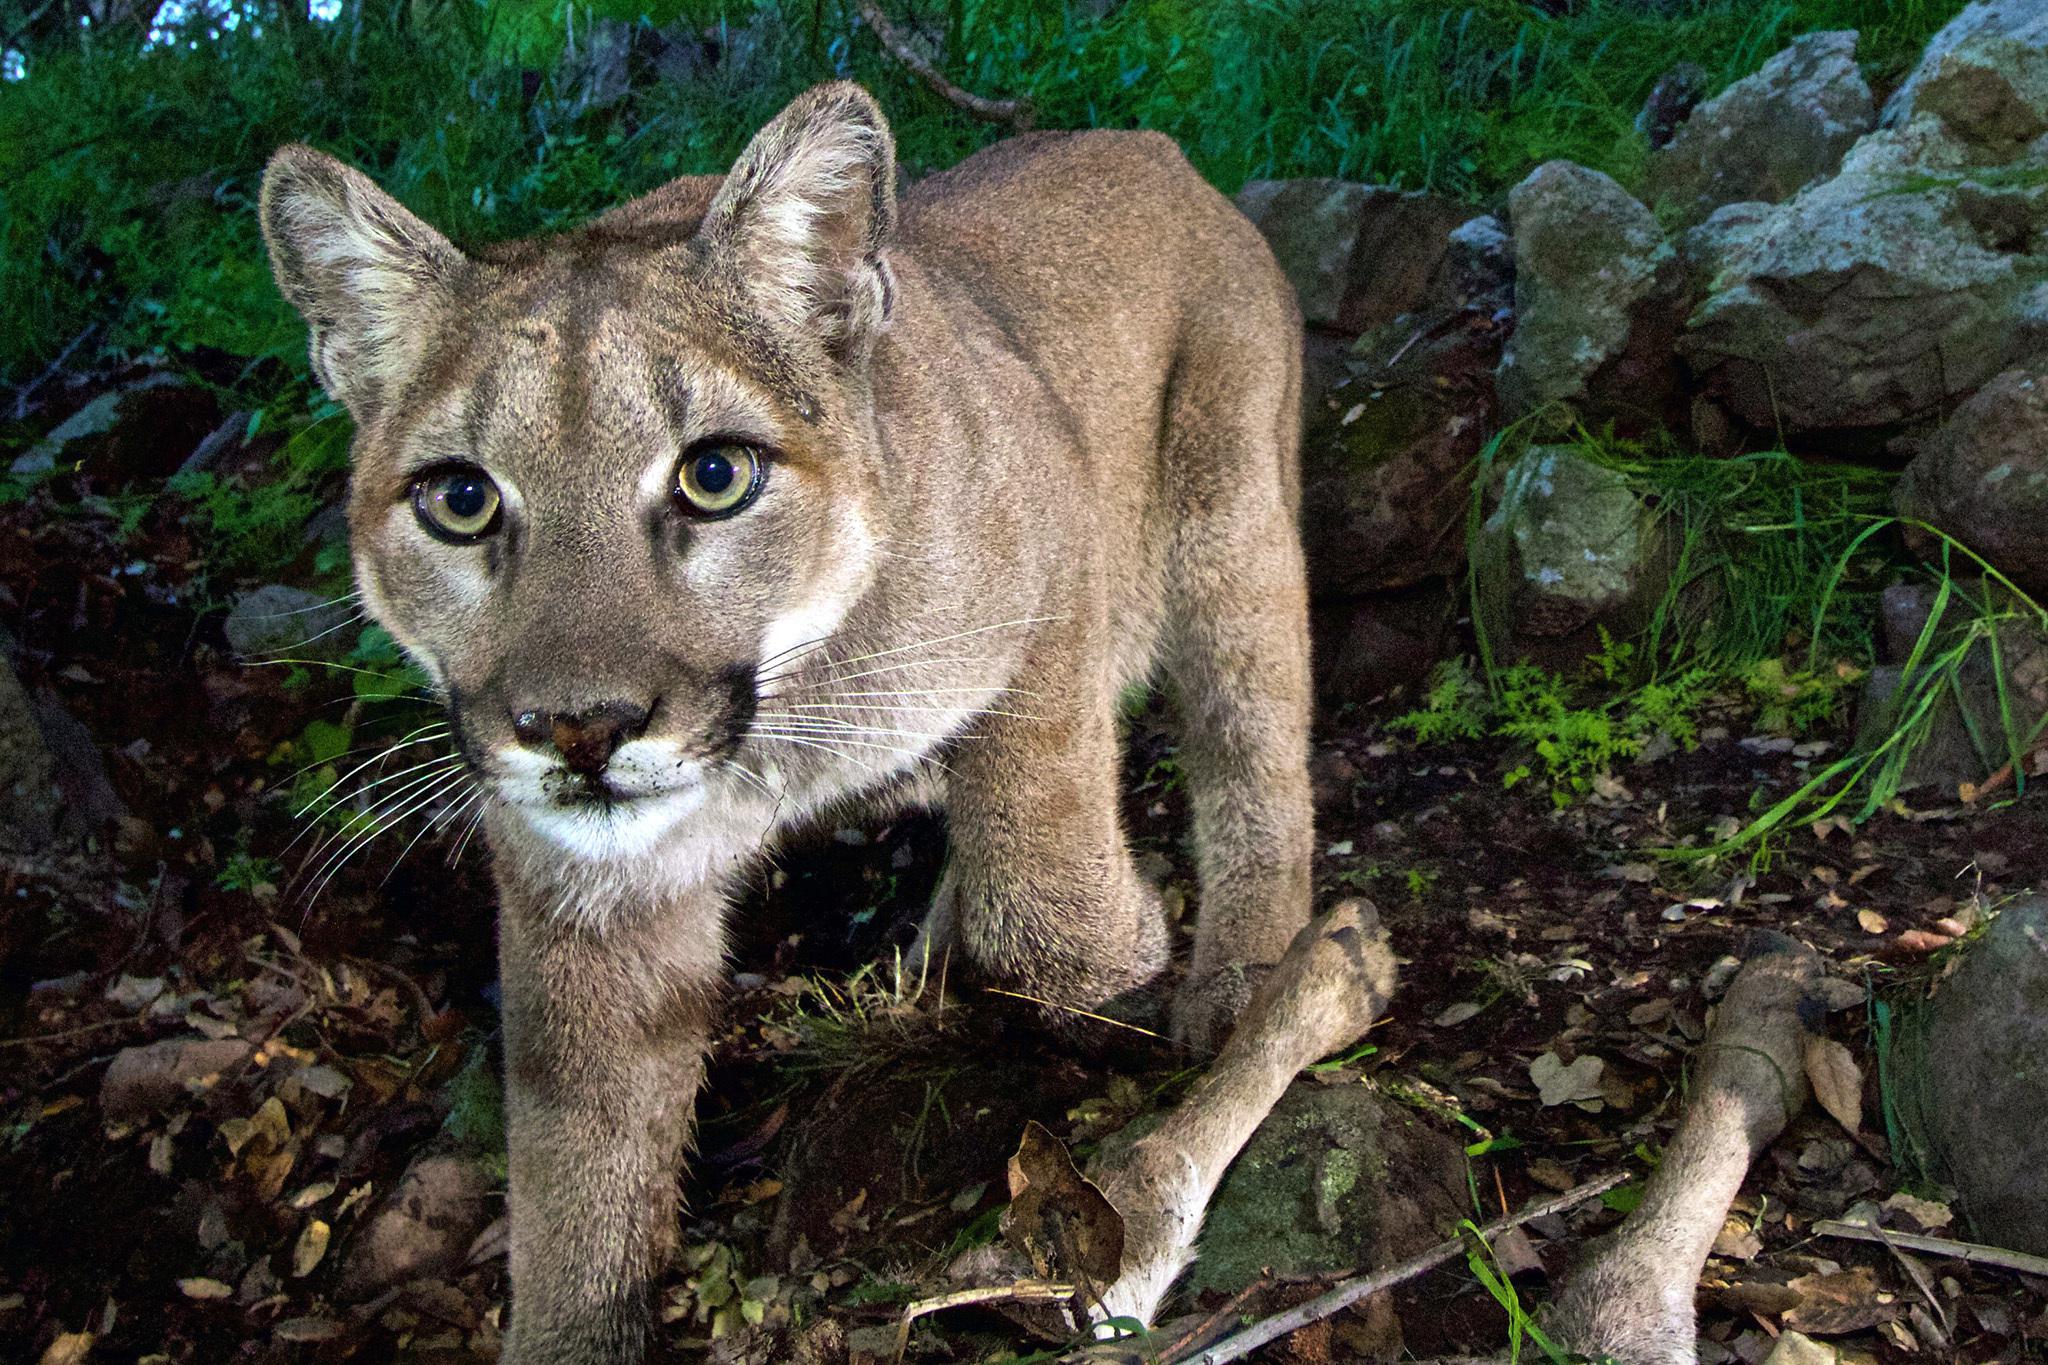 State wildlife officials unable to catch mountain lion responsible for ‘vicious’ attack on young boy